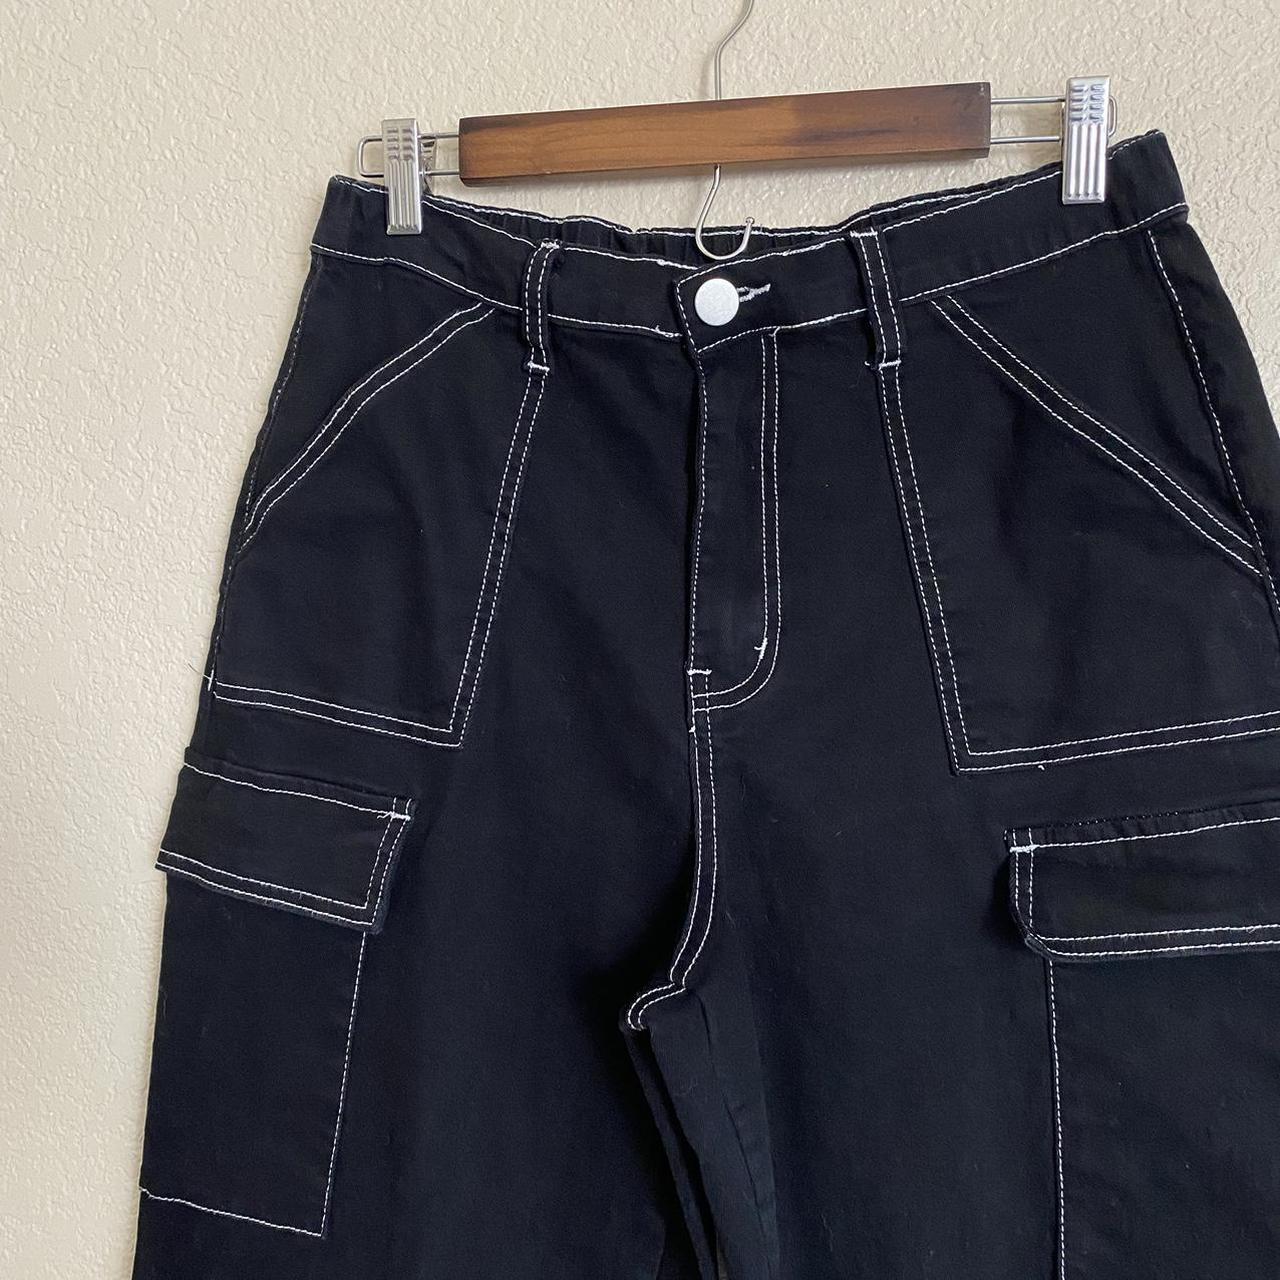 Black Justify cargo pants with white contrast... - Depop